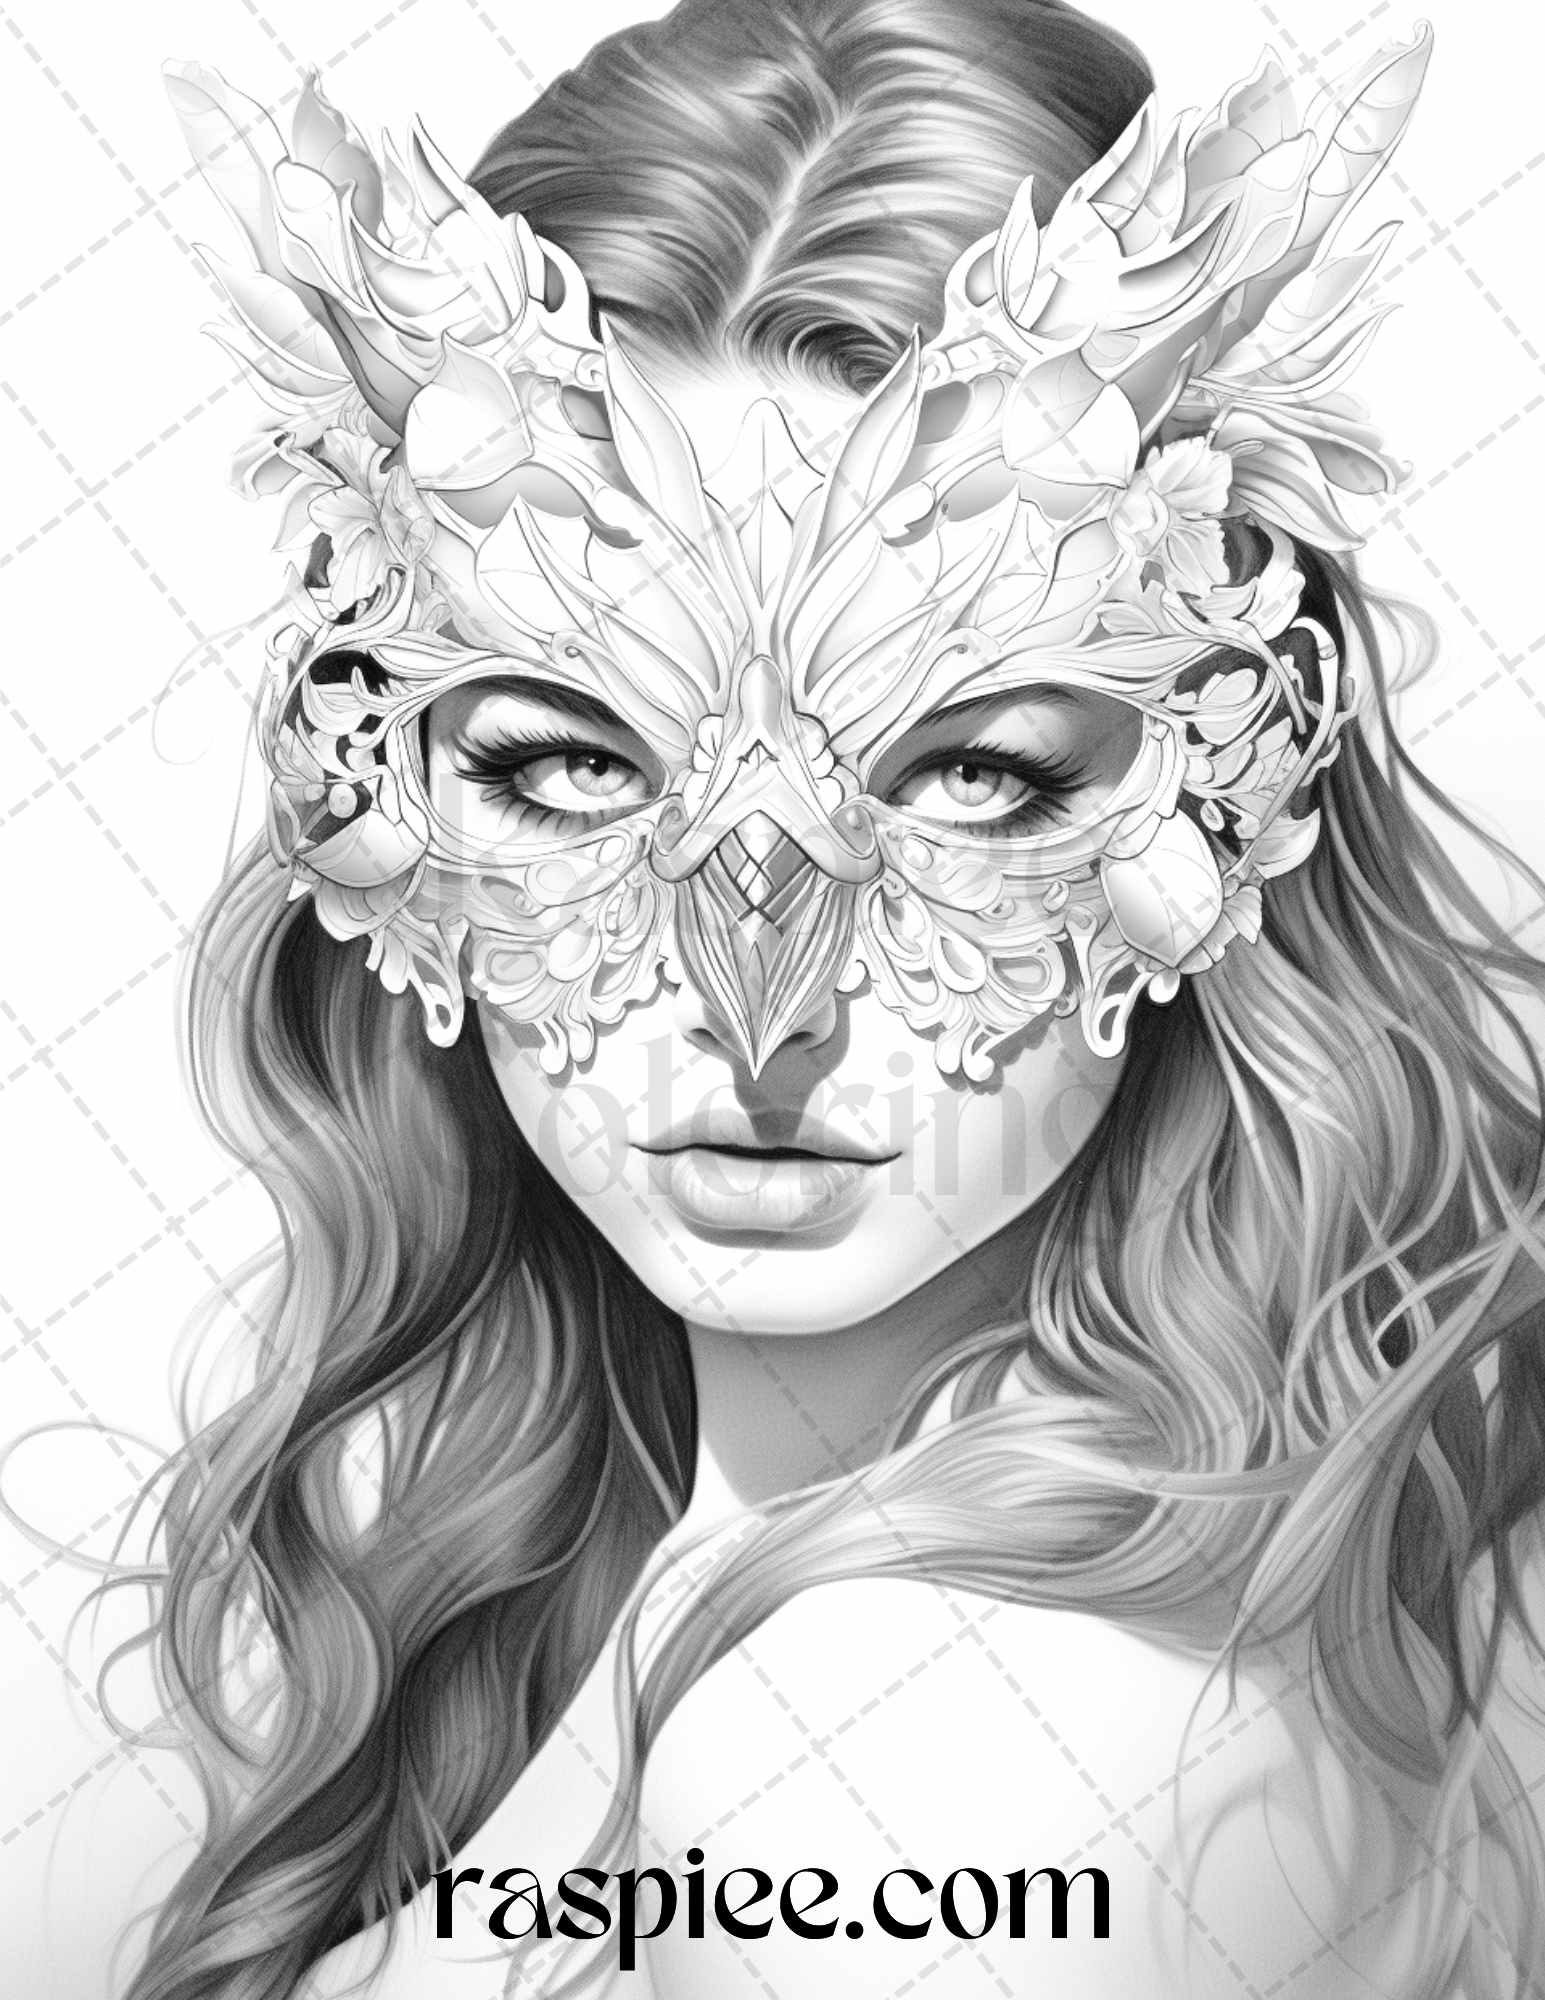 Masquerade girls grayscale coloring pages, printable coloring book, DIY art, adult coloring, fantasy grayscale art, portrait coloring pages for adults